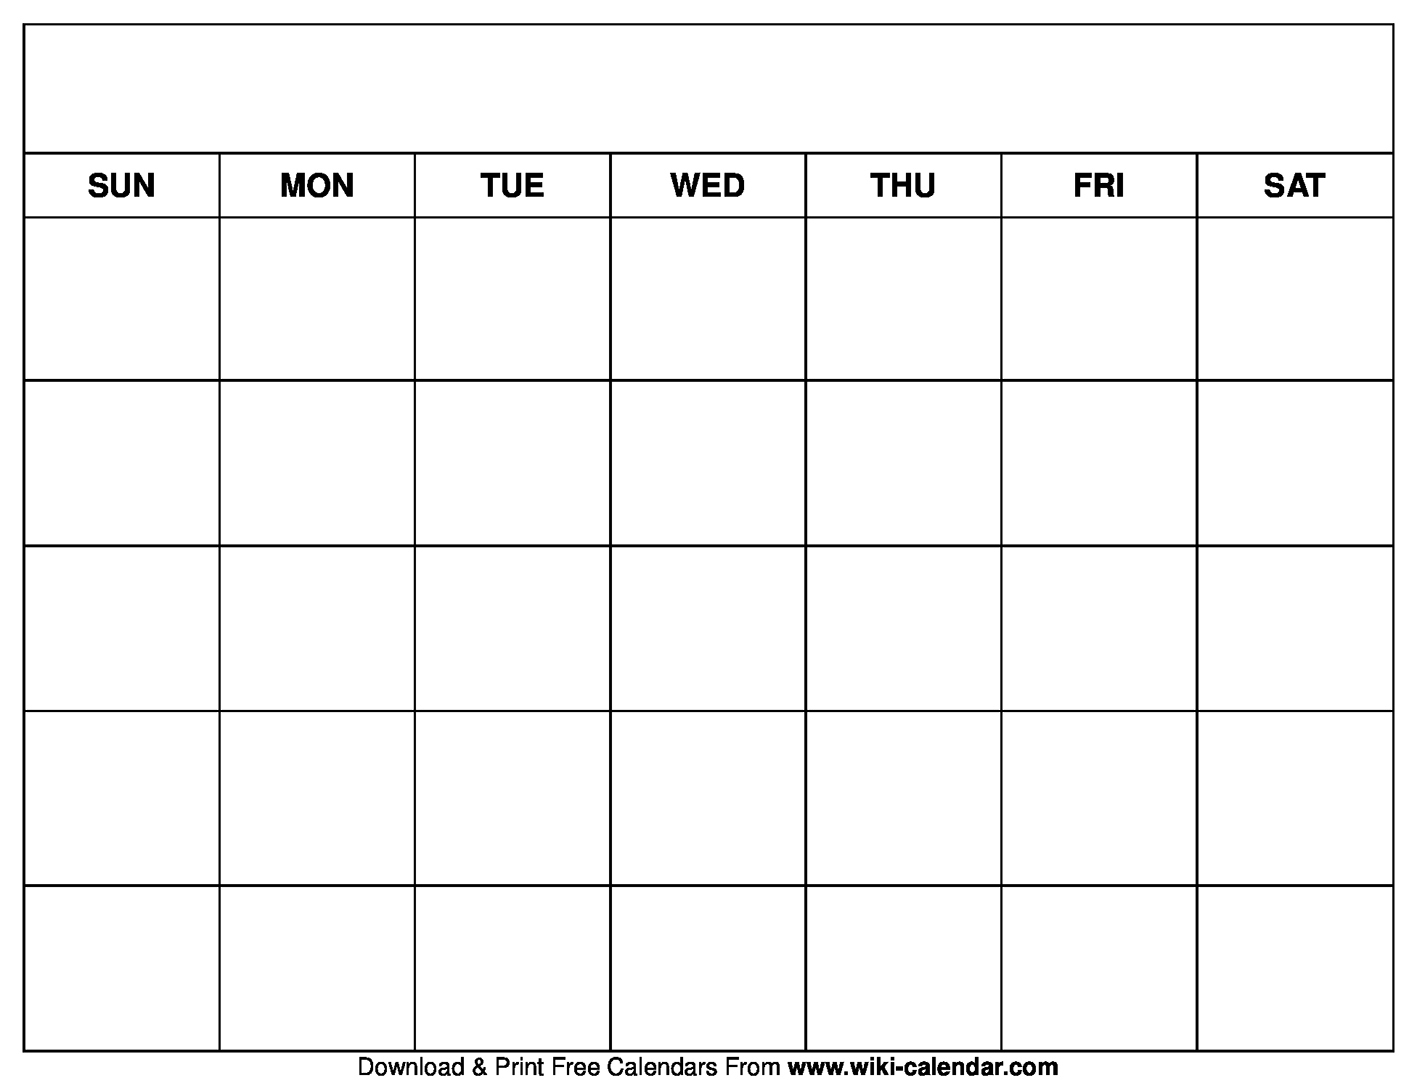 Pick Free Printable Calendar No Download Required